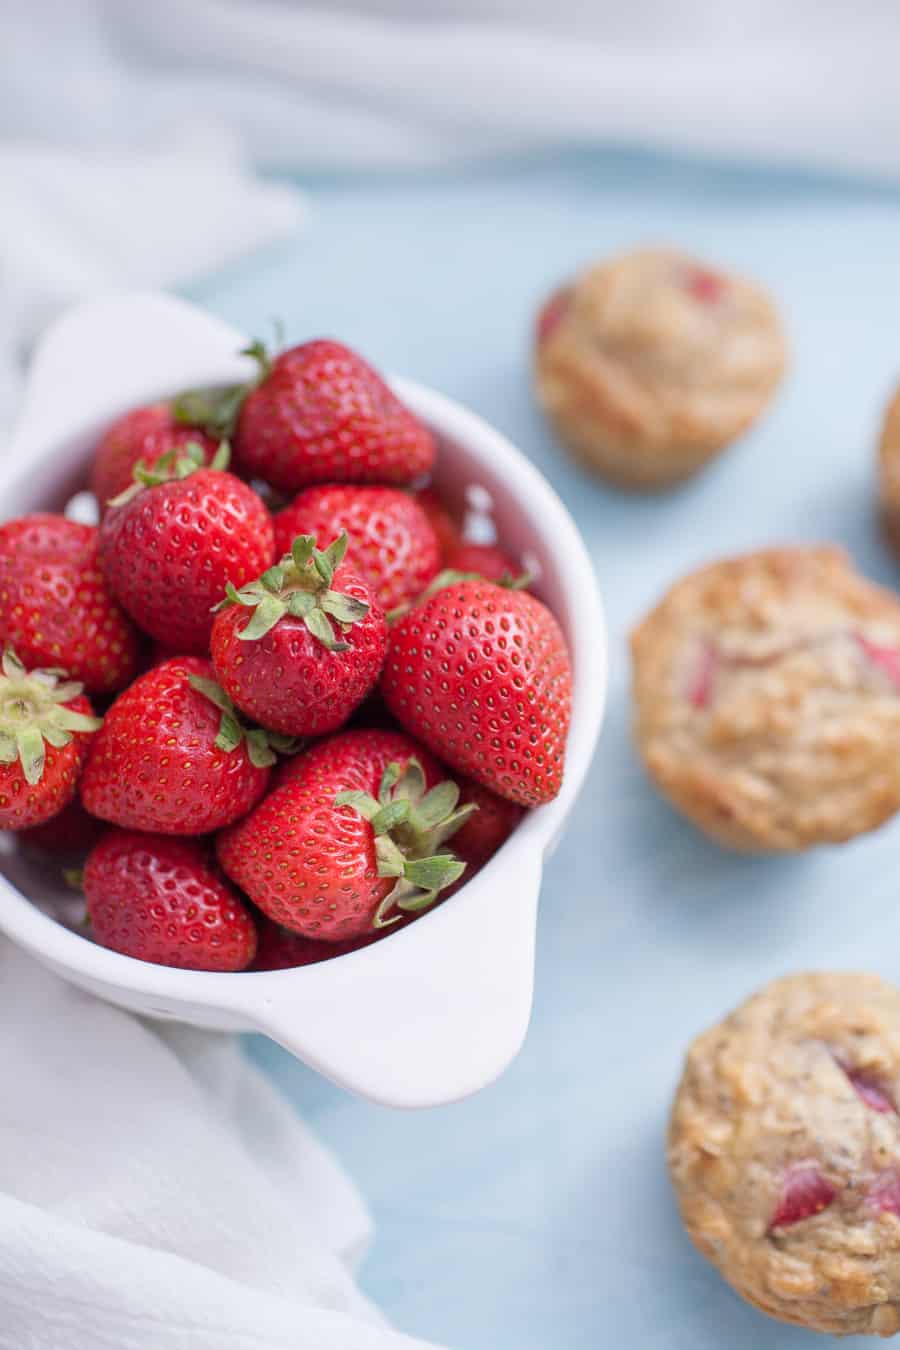 No Sugar Added Strawberry Chia Seed Muffins are such a fun treat to have on hand this week! They are so easy to make, no fancy ingredients required, even though they are sugar free! These no sugar added muffins get their sweetness from applesauce and strawberries, which are really the star of the show. Pack in some extra protein with chia seeds and these muffins are a true powerhouse.?